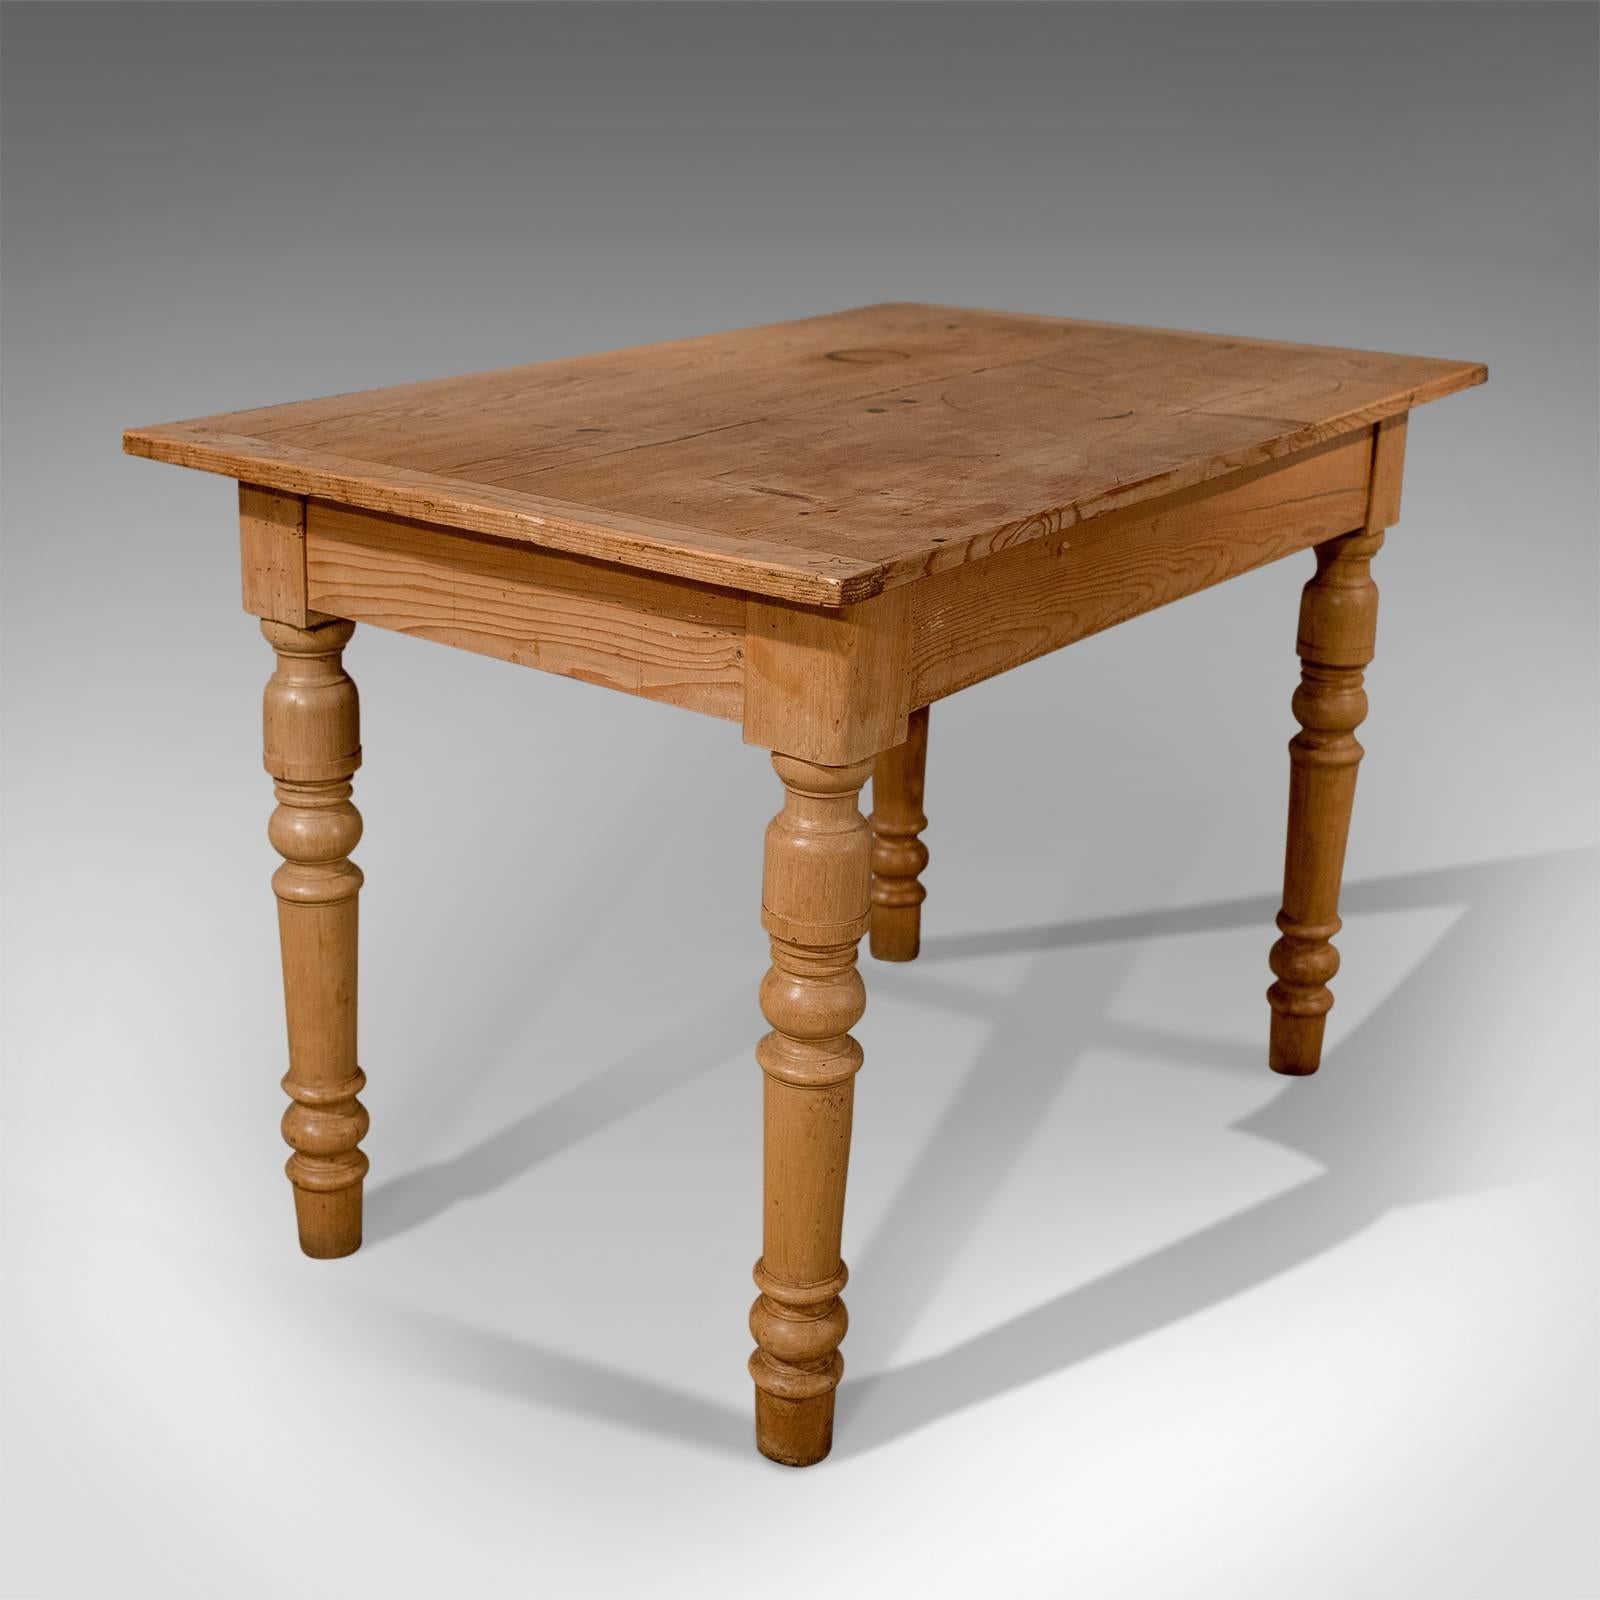 Victorian Pine Kitchen Dining Country Table with Storage under Top, circa 1900 4